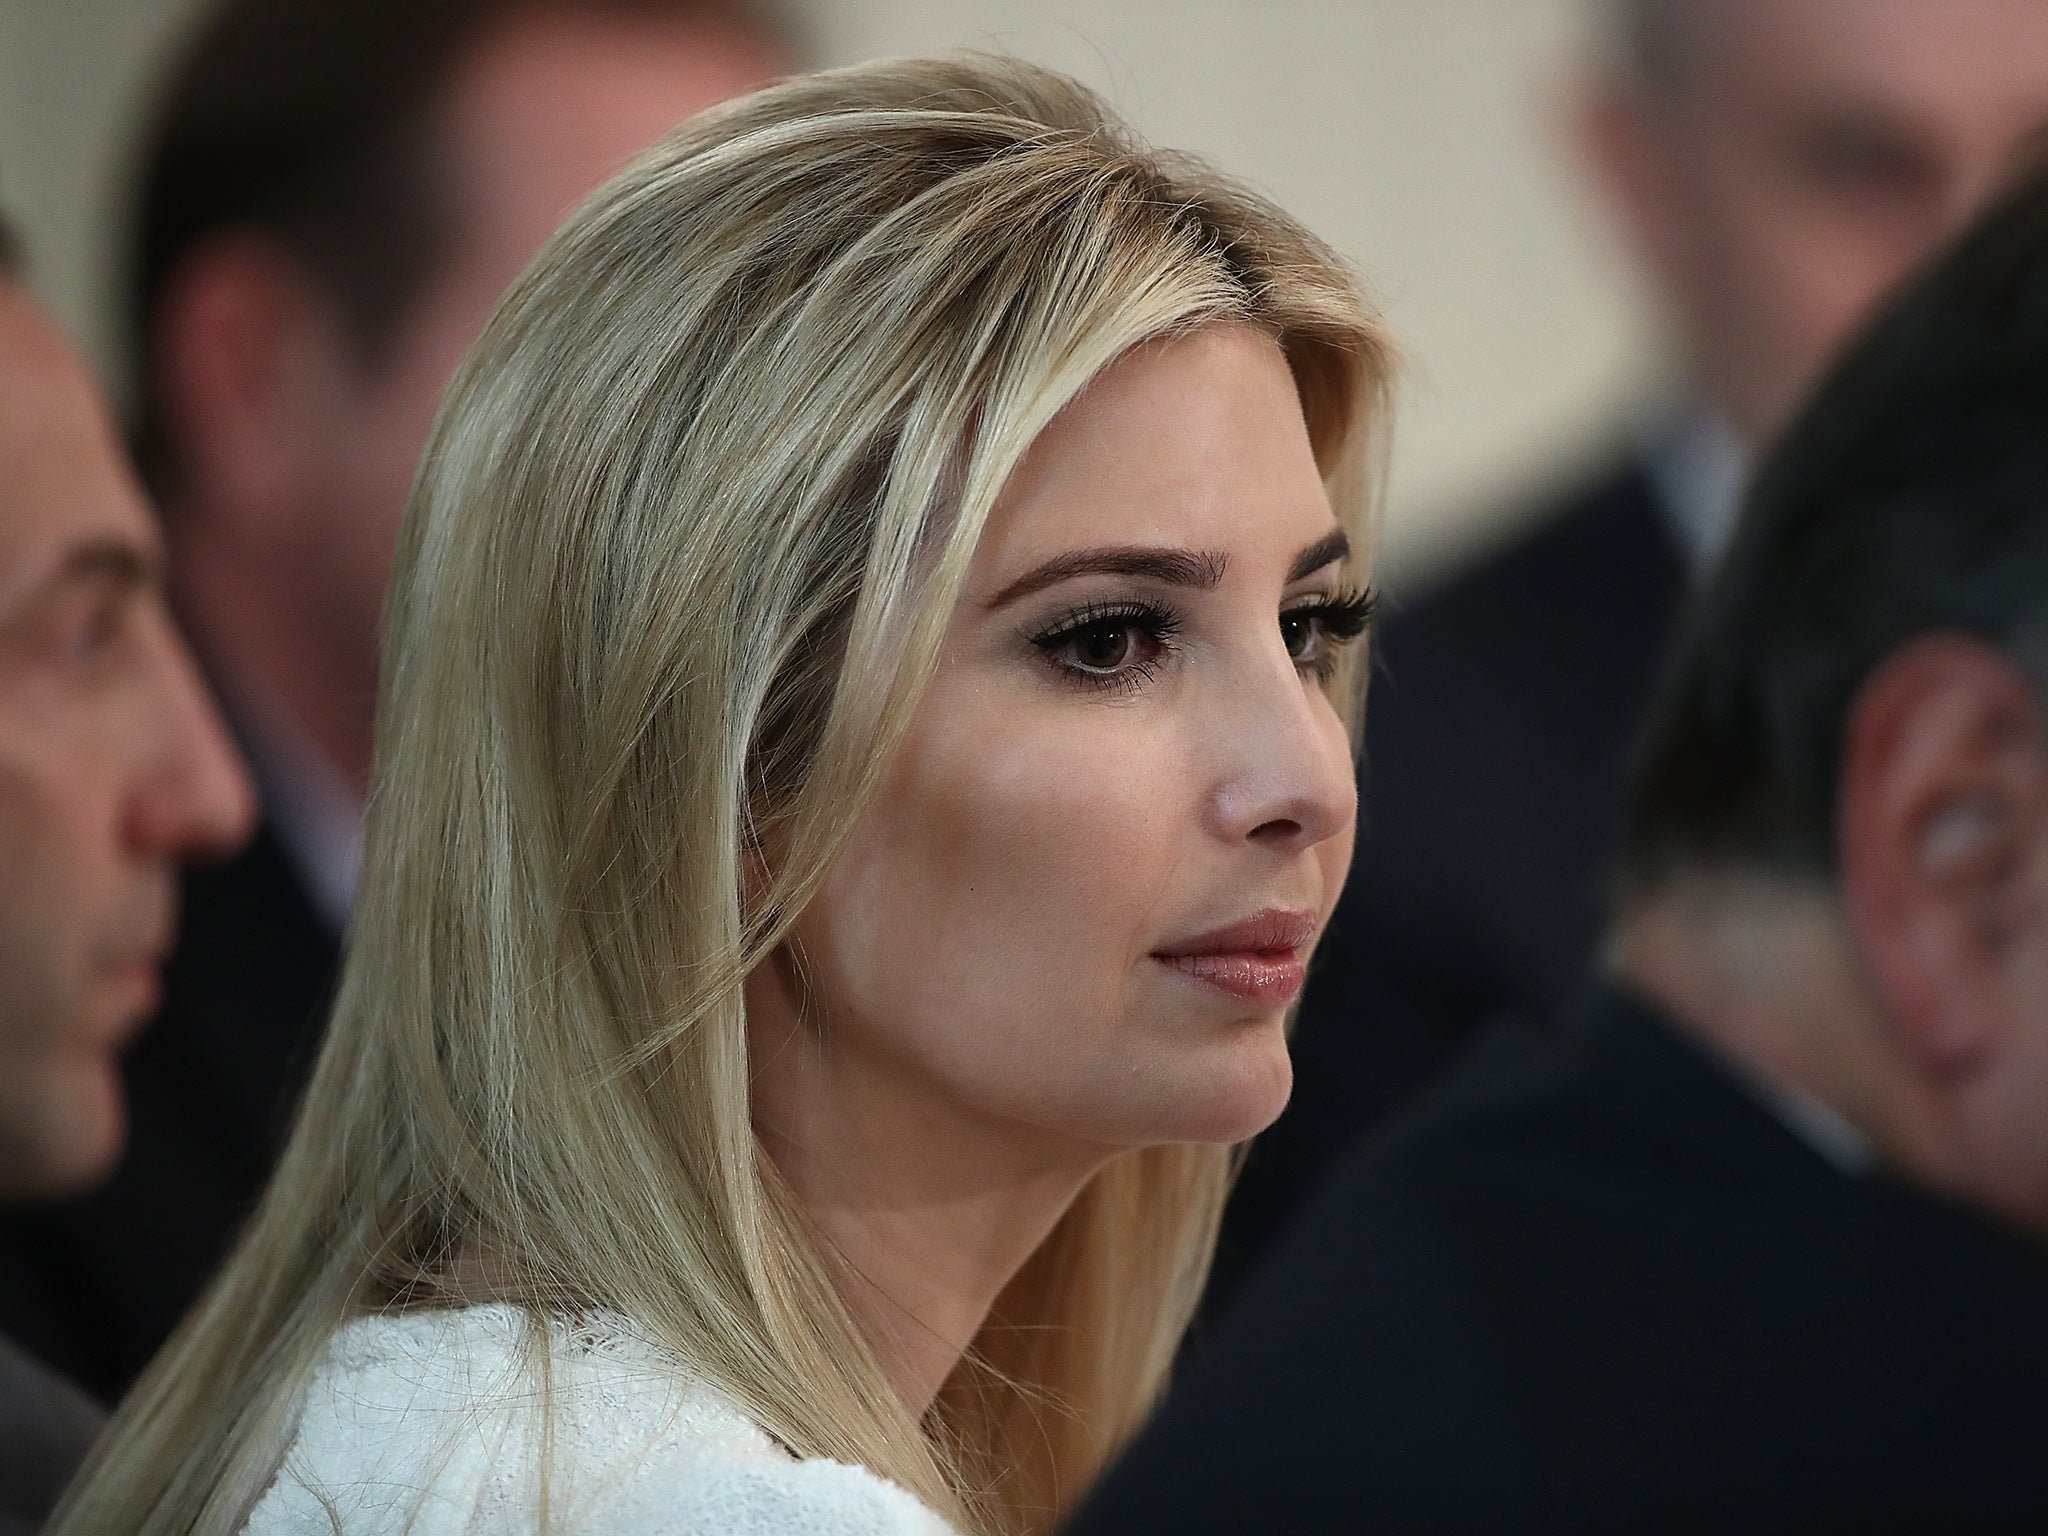 Ms Trump reportedly made recommendations for what should be said in her father's address during a brainstorming session in the Oval Office on Sunday